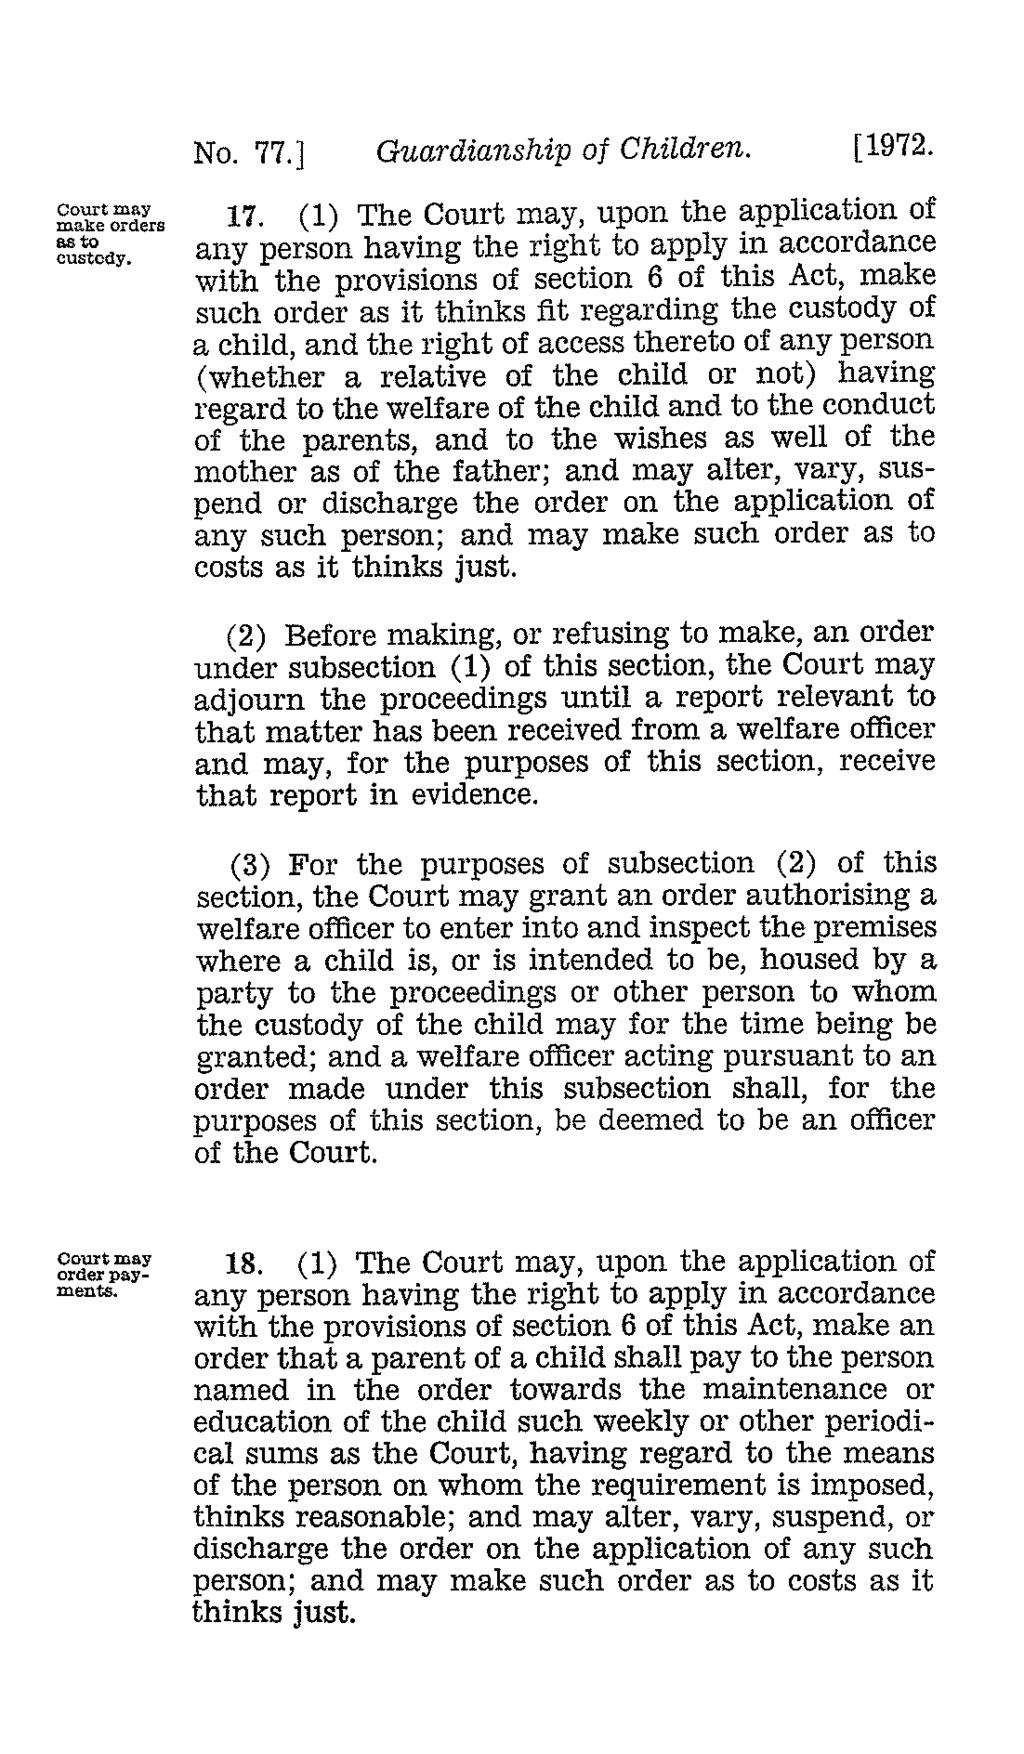 No. 77.] Guardianship of Children. [1972. Court may make orders as to custody. 17.